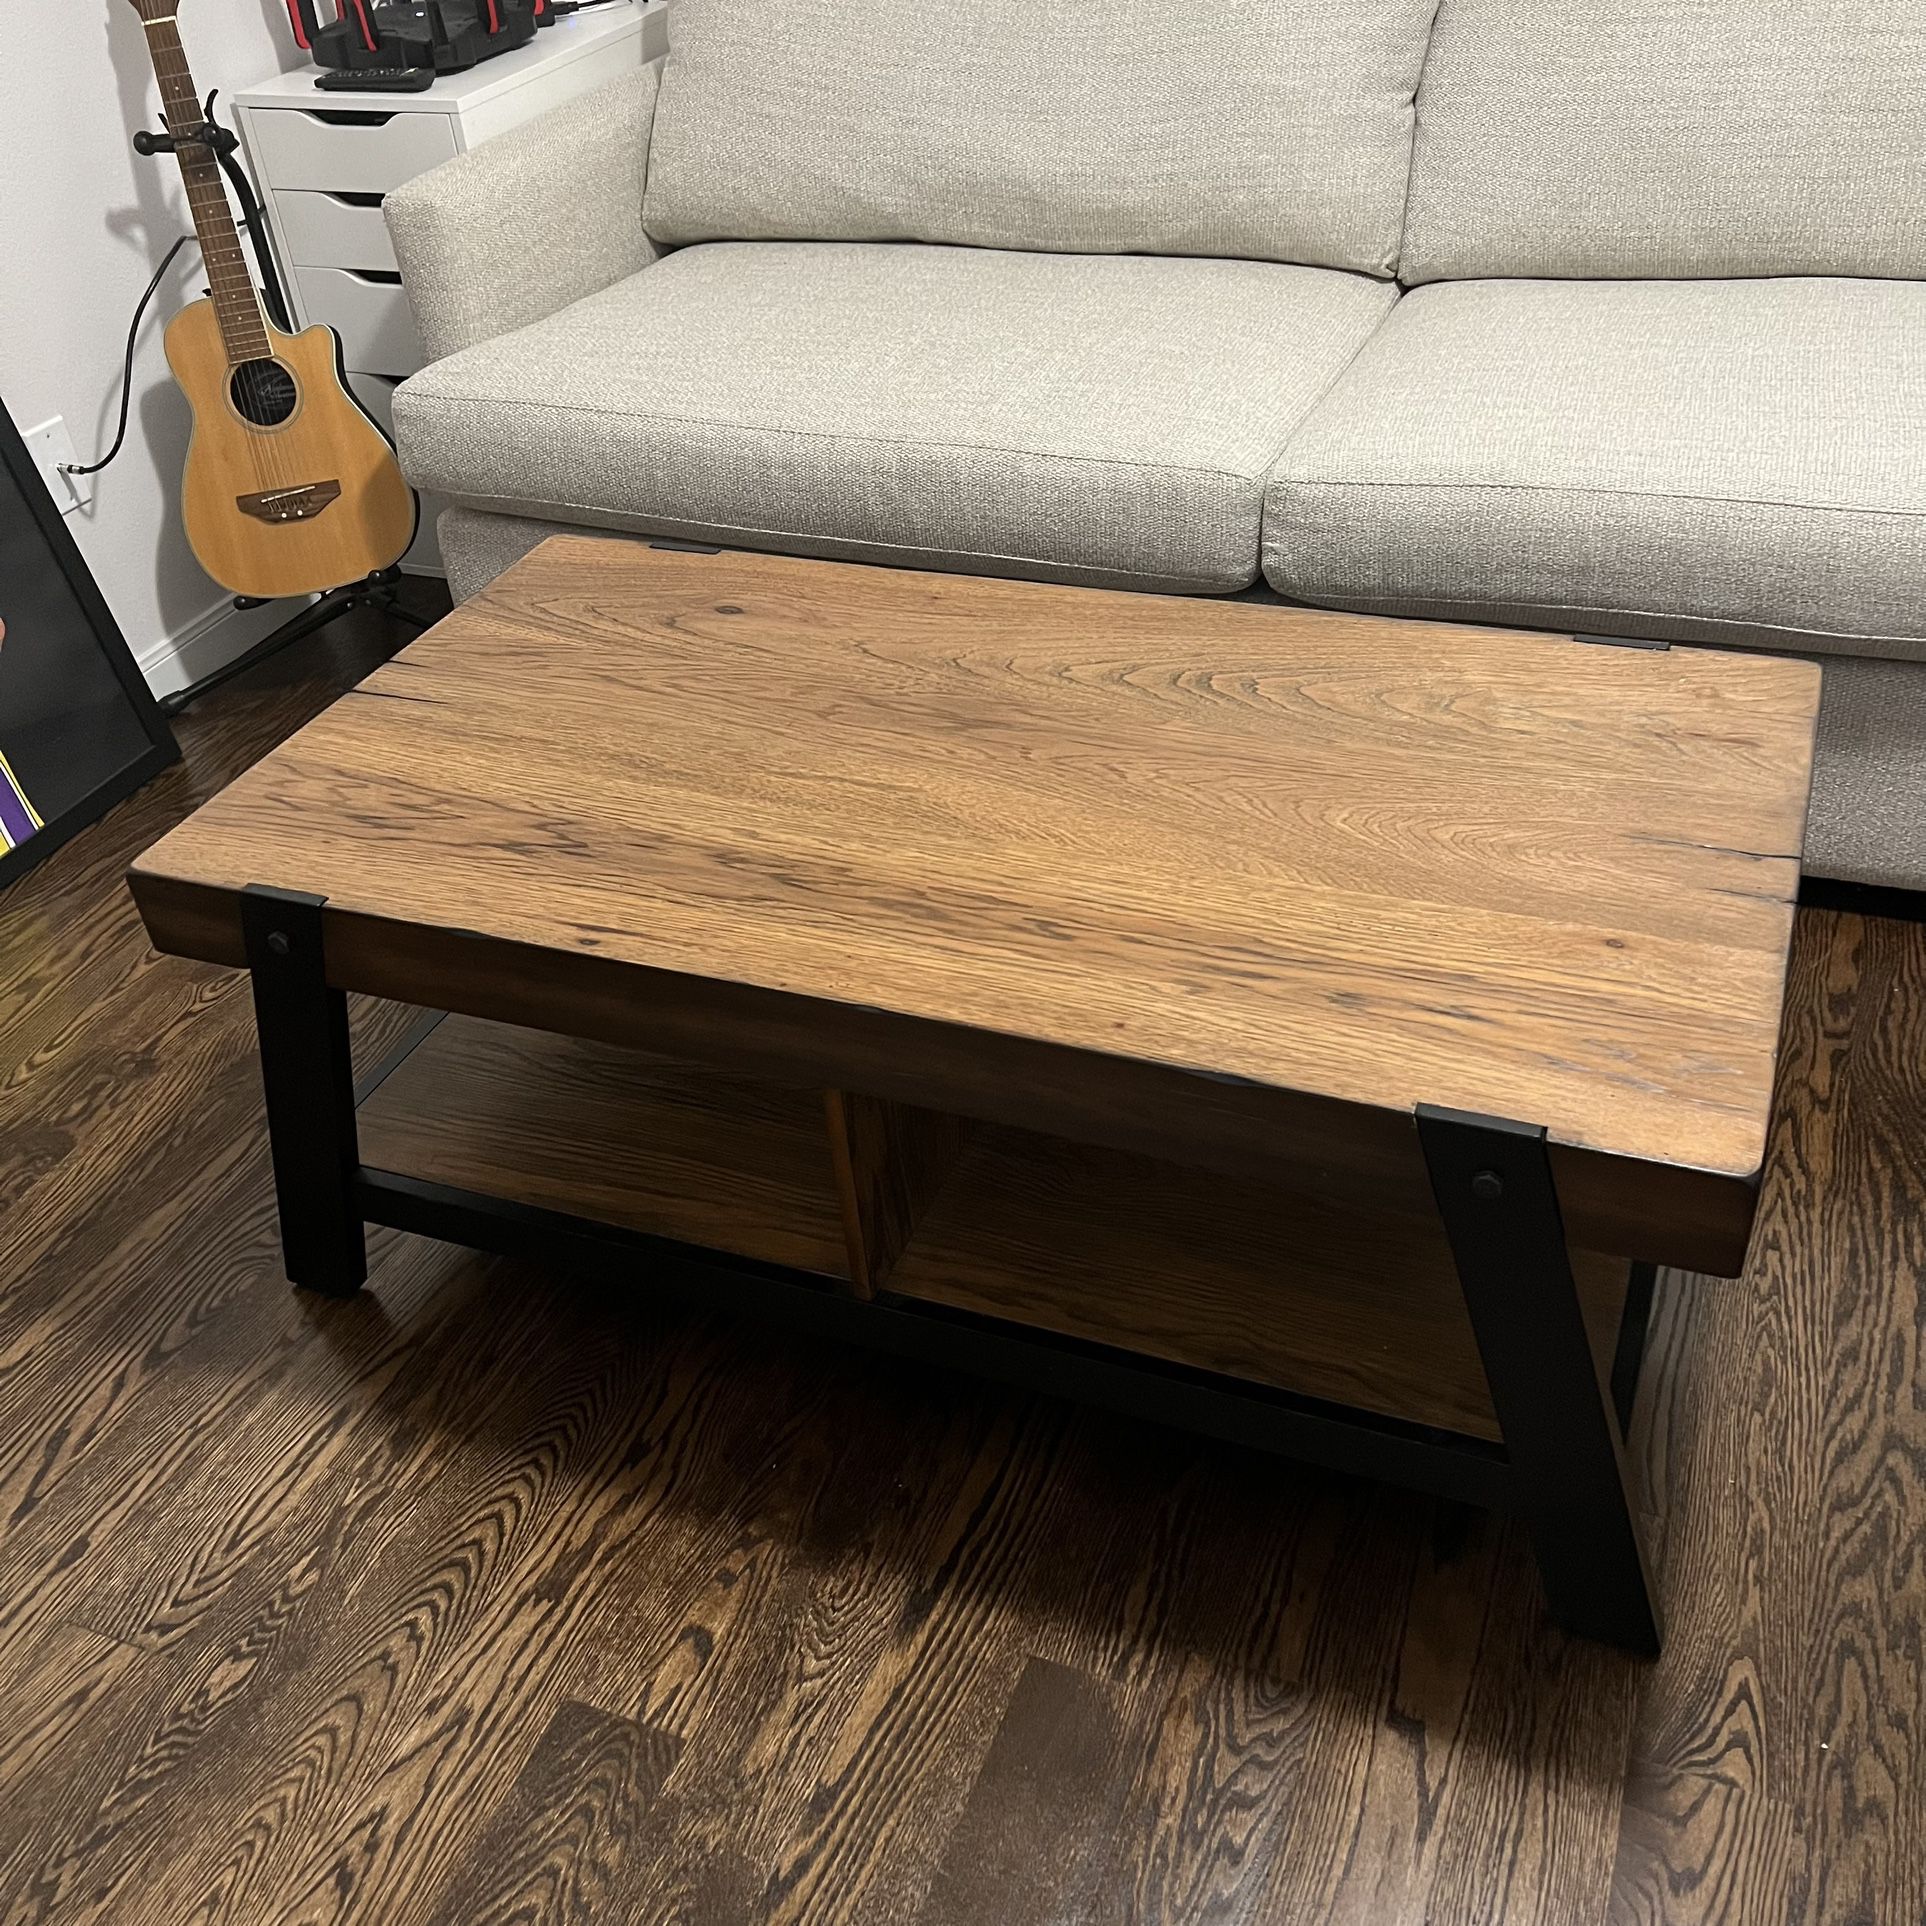 Modern Rustic Coffee Table - Perfect for Any Living Room